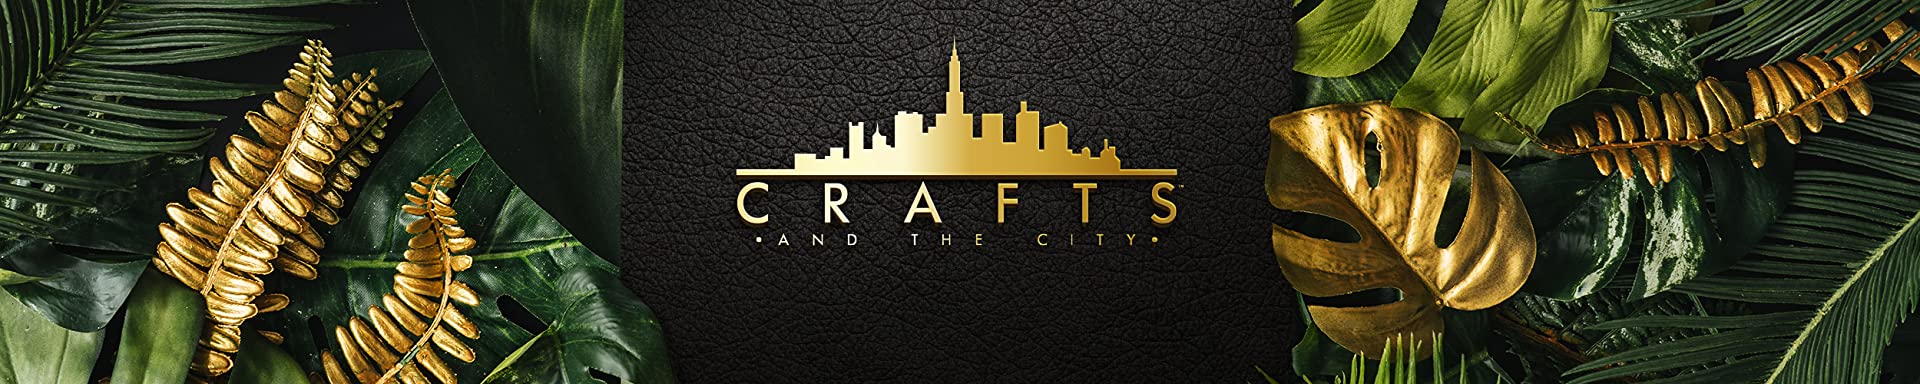 CRAFTS AND THE CITY black-owned business